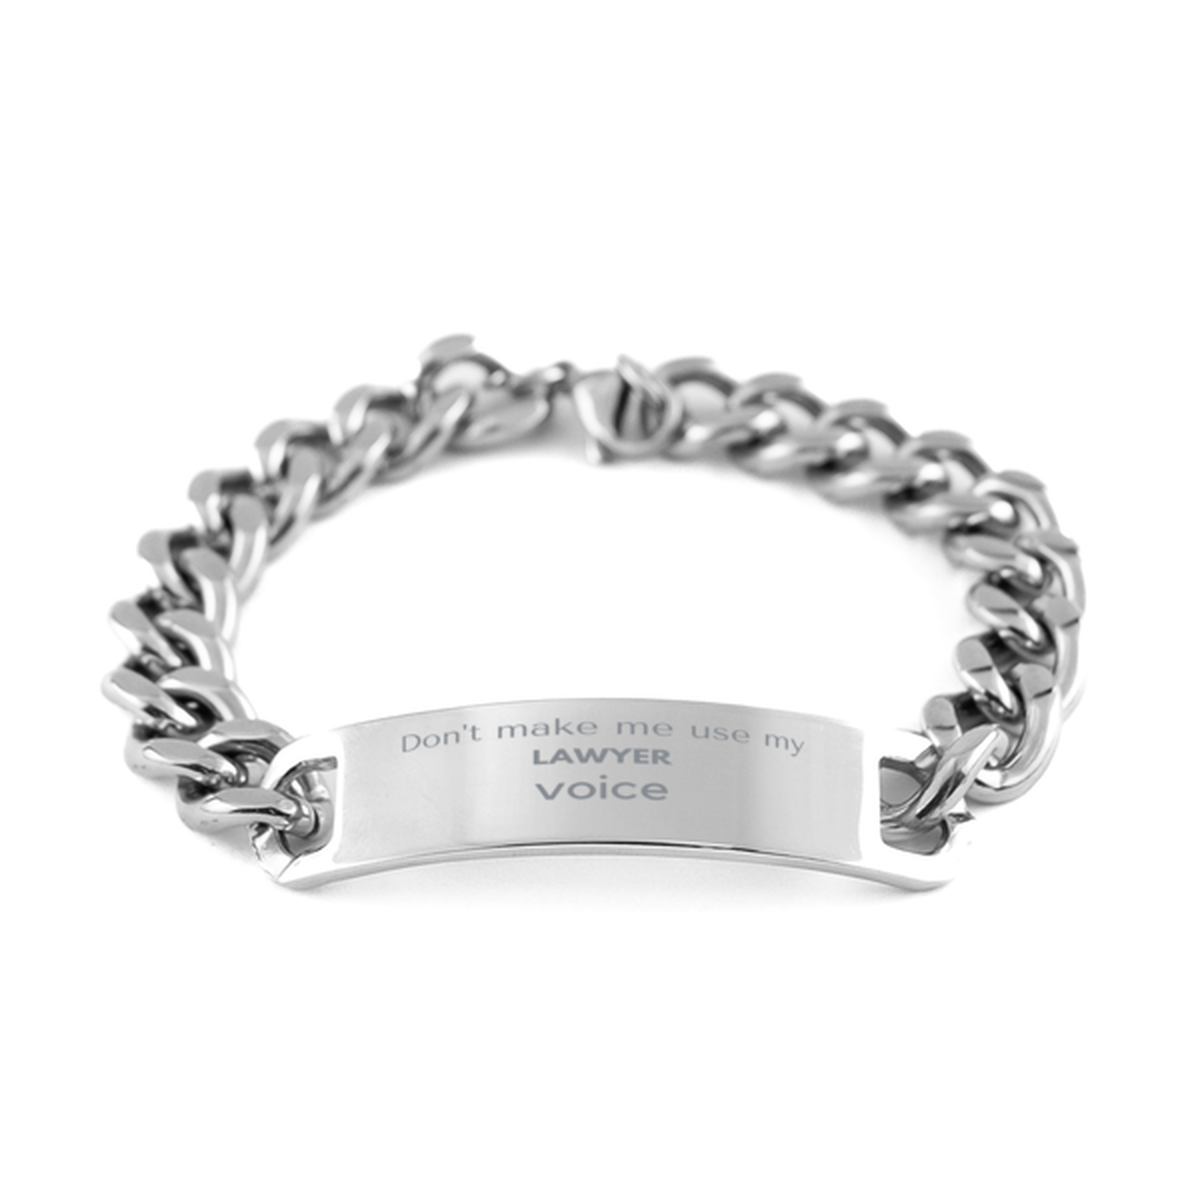 Don't make me use my Lawyer voice, Sarcasm Lawyer Gifts, Christmas Lawyer Cuban Chain Stainless Steel Bracelet Birthday Unique Gifts For Lawyer Coworkers, Men, Women, Colleague, Friends